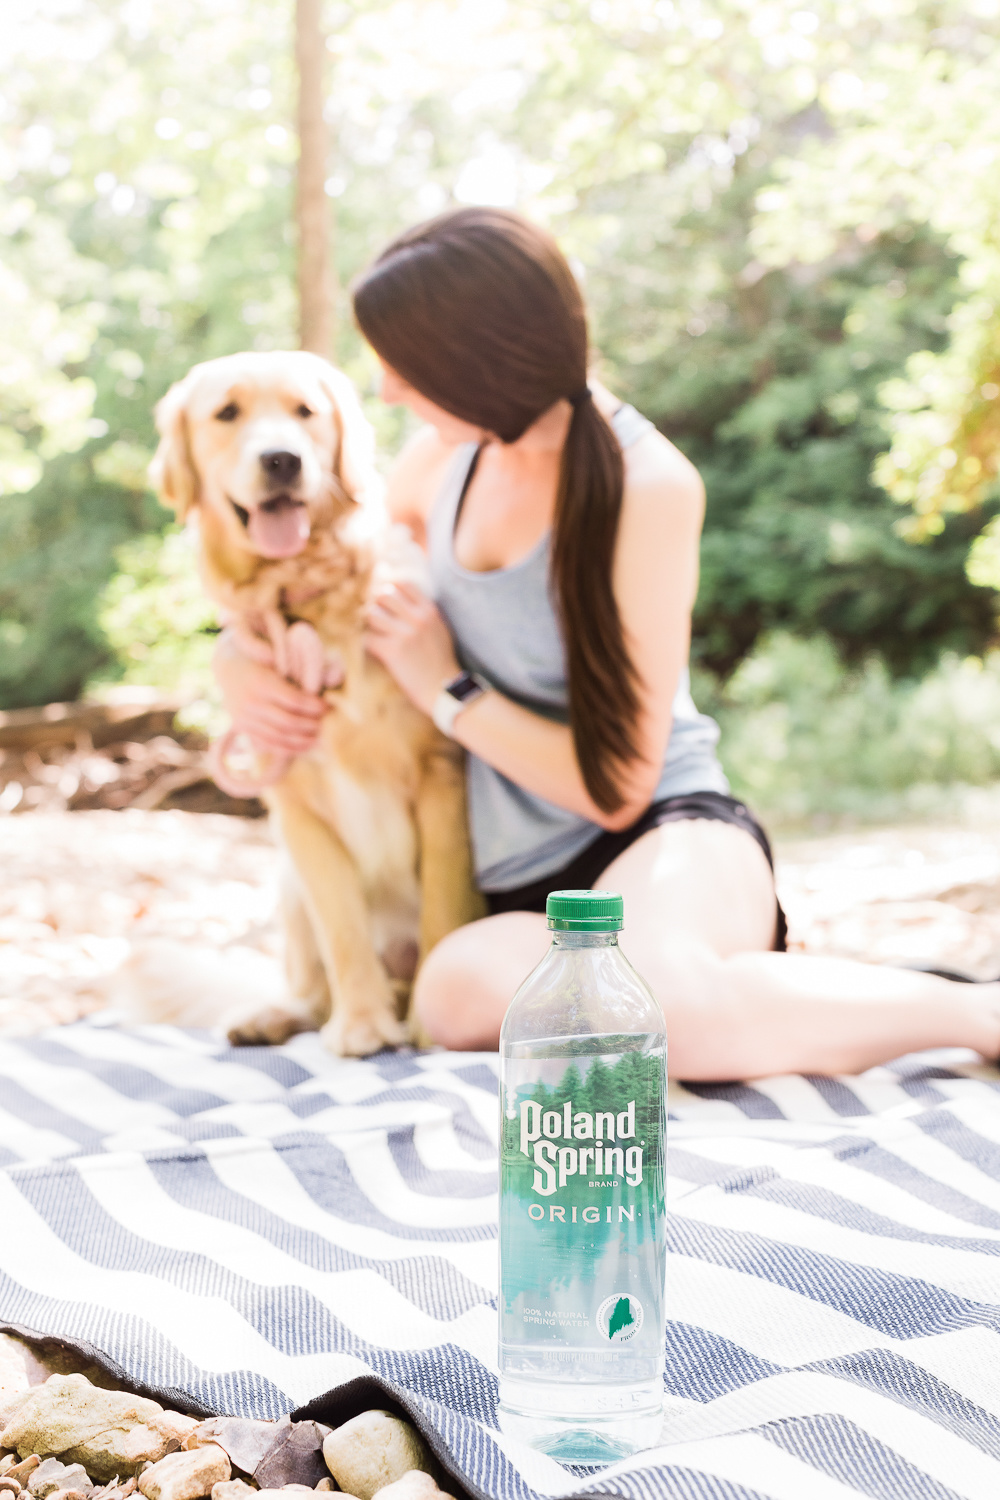 Poland Spring Origin Natural Spring Water at Walmart, Summer Adventuring: How to Plan the Perfect Hiking Picnic by popular midwest blogger Stephanie Ziajka from Diary of a Debutante, Columbia MO hiking